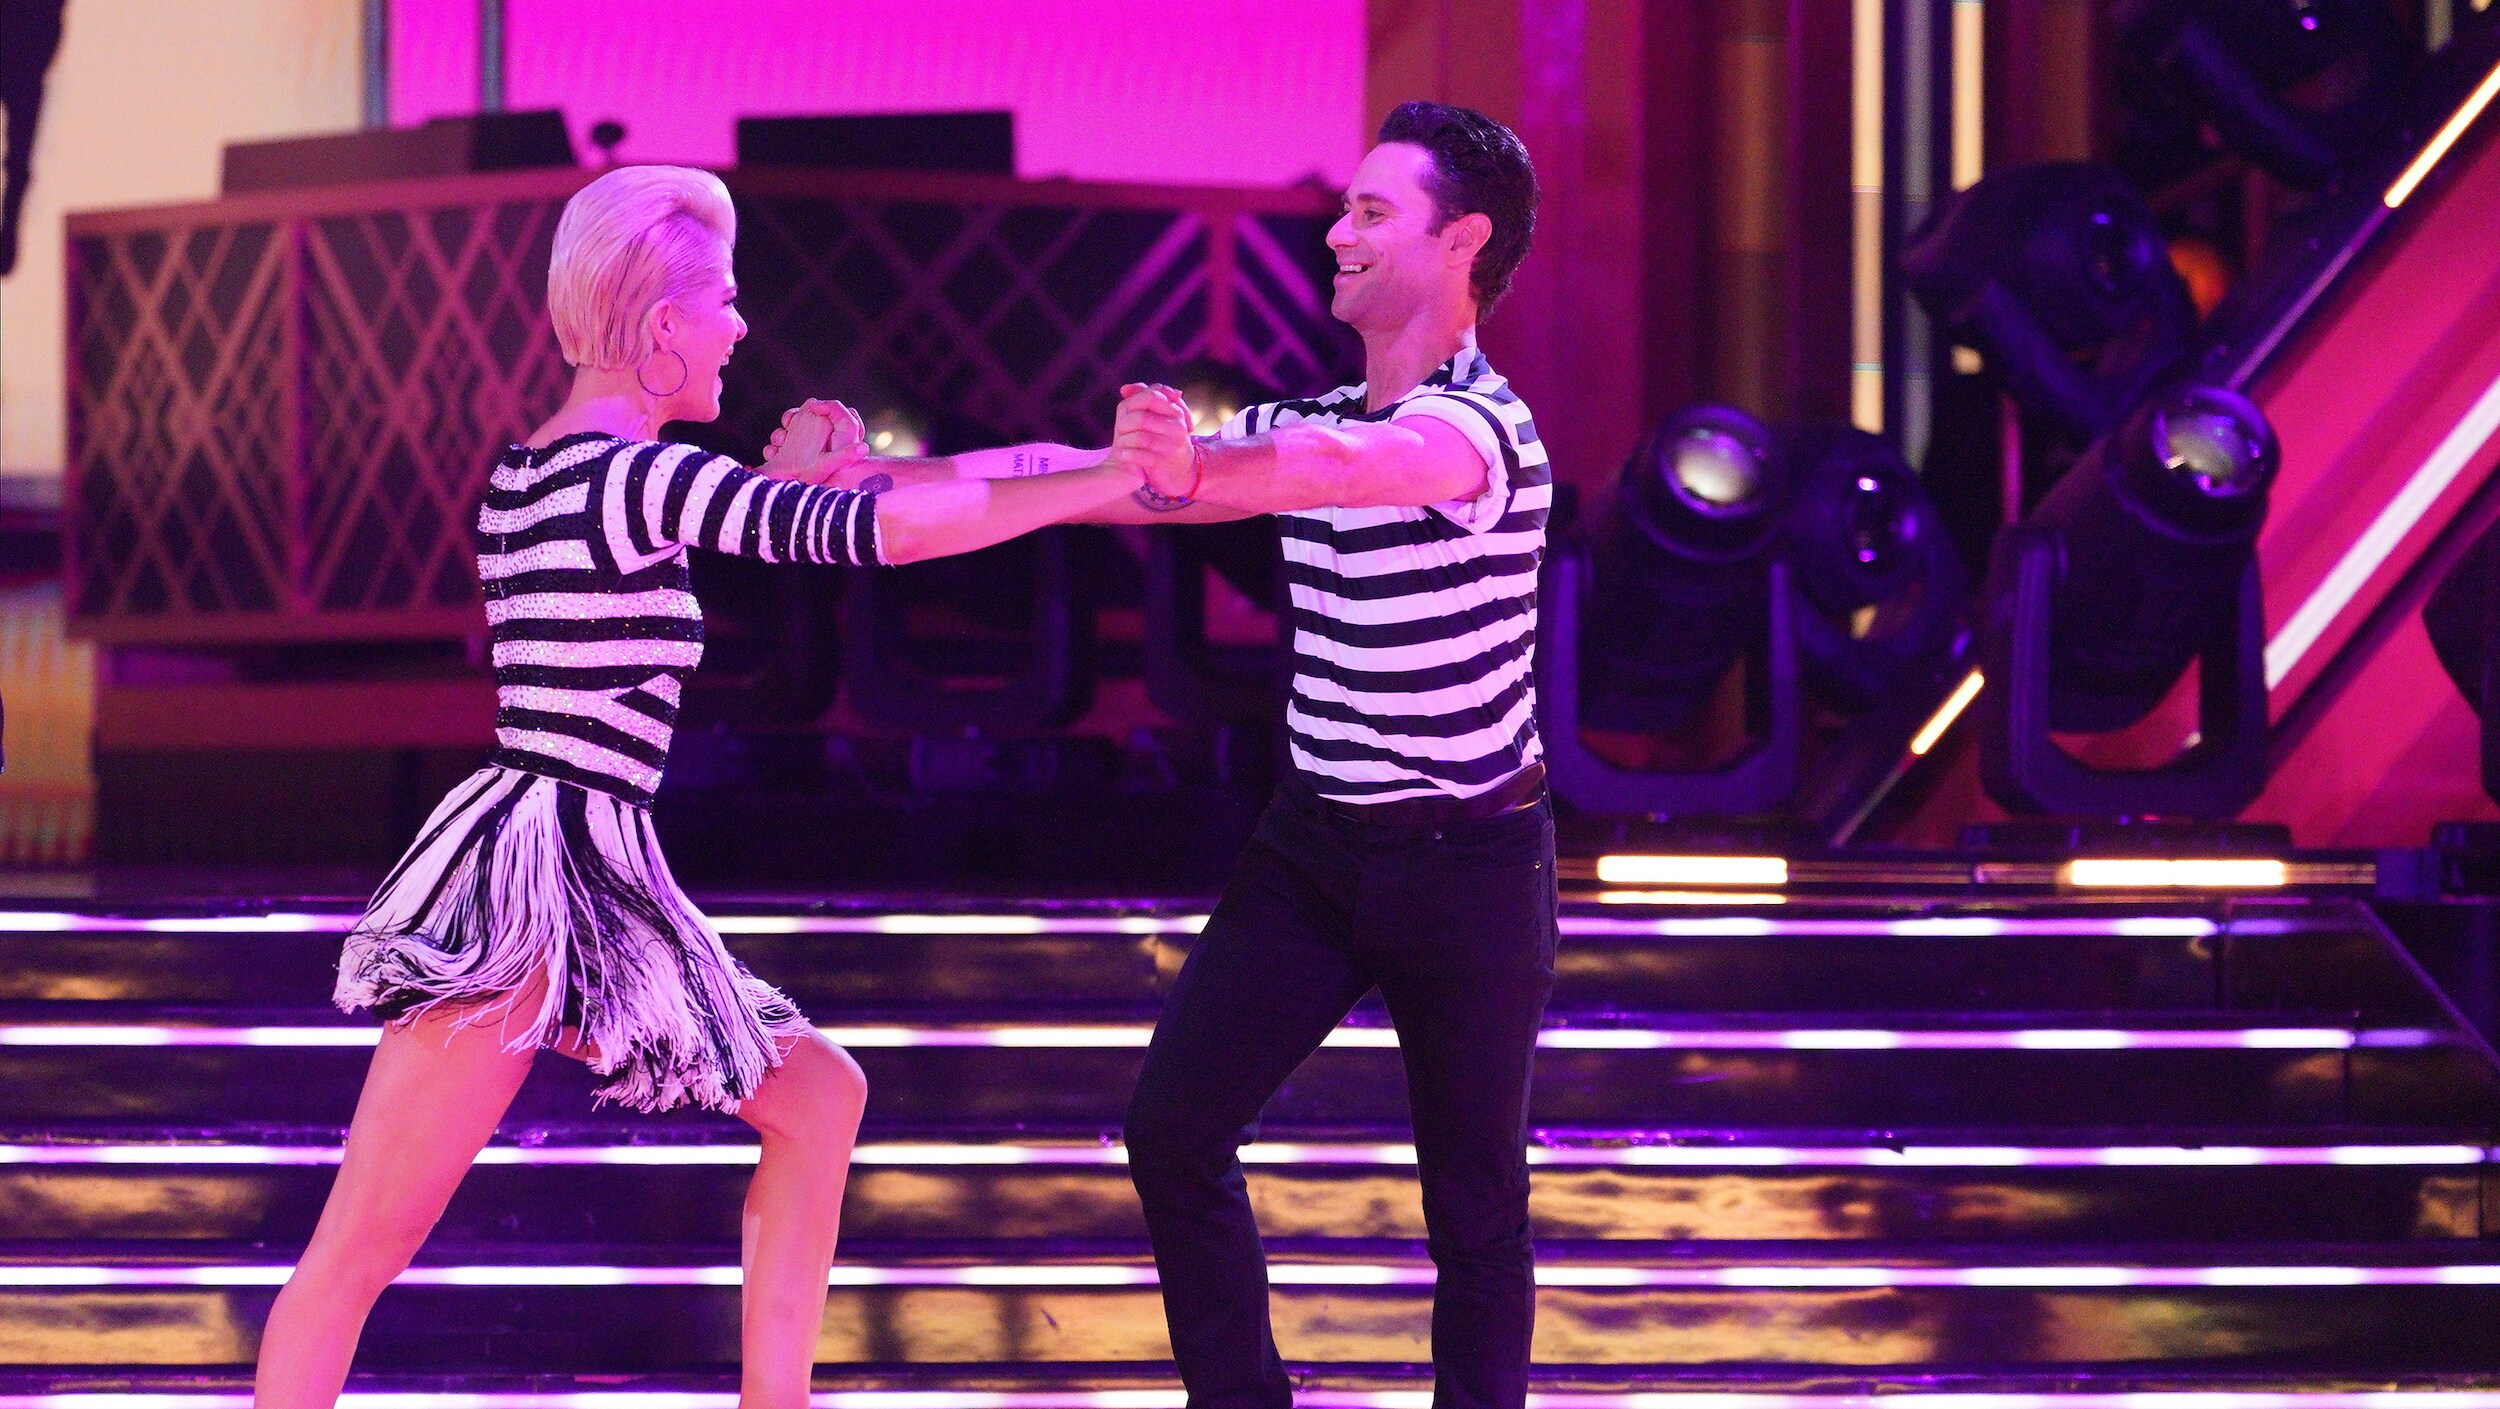 DANCING WITH THE STARS - “Elvis Night” –  The 15 remaining couples “Can’t Help Falling in Love” with Elvis this week as they take on all-new dance styles to music by The King of Rock ‘n’ Roll. Week two of the mirorrball competition will stream live MONDAY, SEPT. 26 (8:00pm ET / 5:00pm PT), on Disney+. (ABC/Christopher Willard) SELMA BLAIR, SASHA FARBER